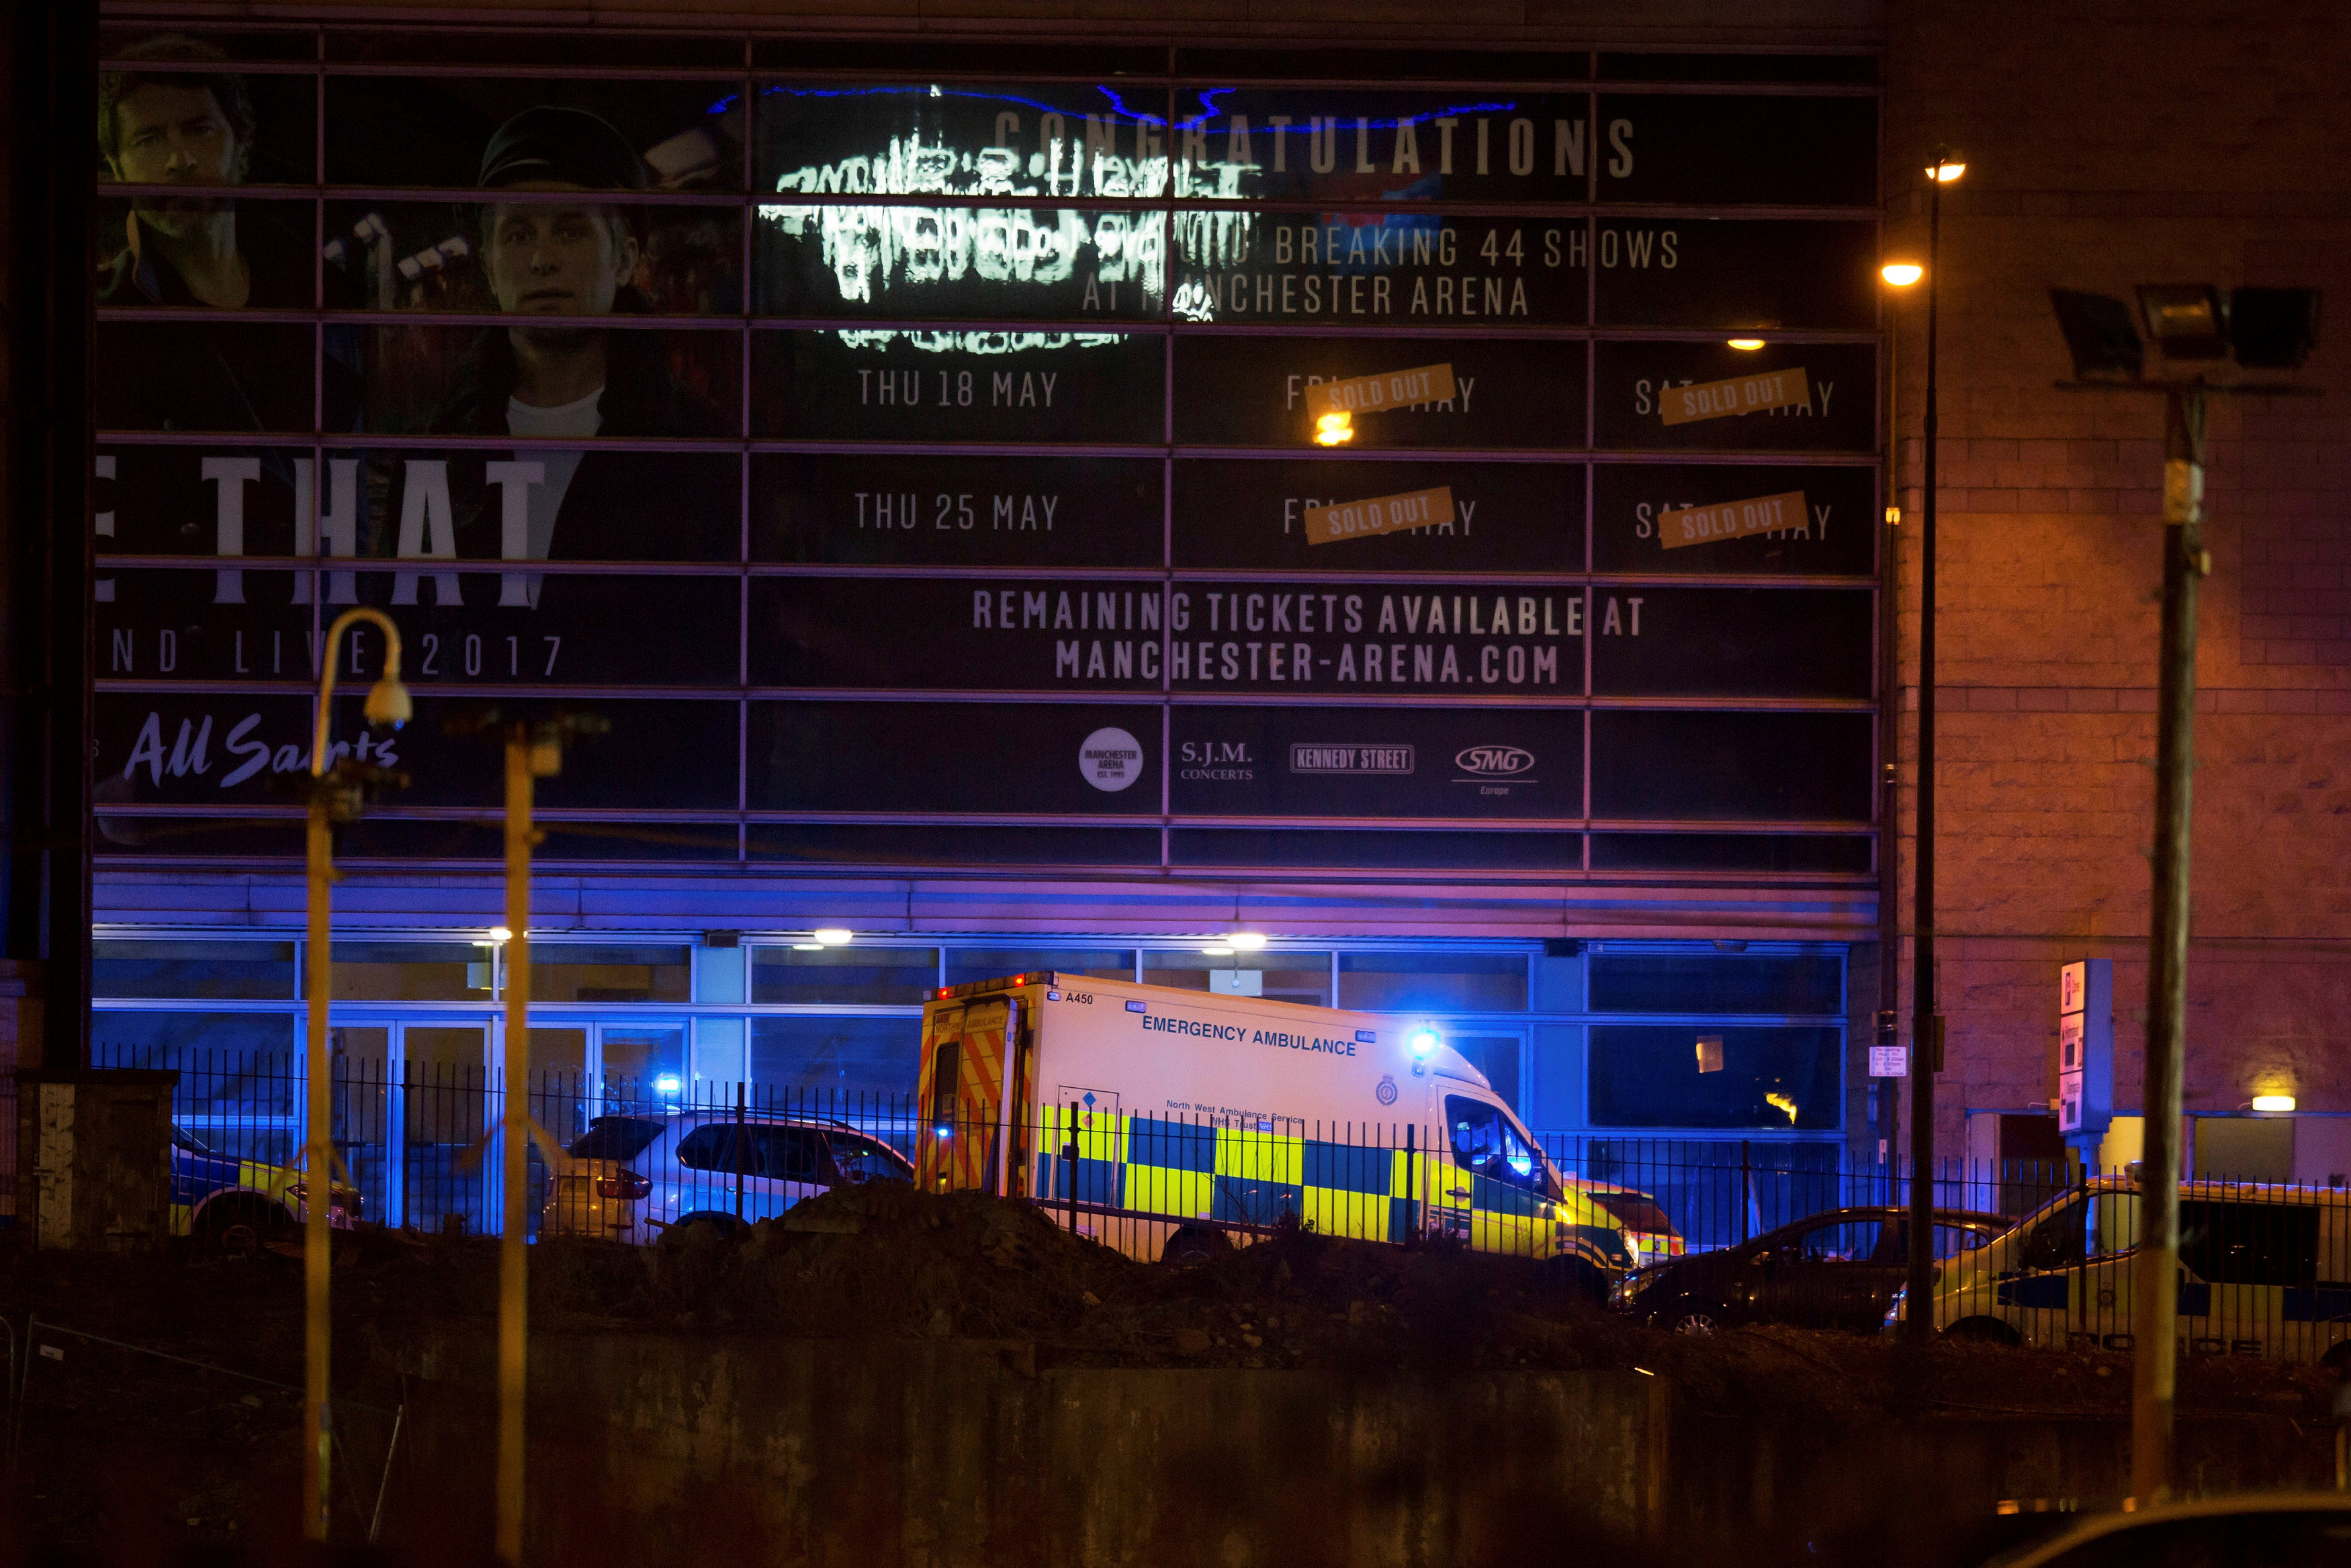 A police van and an ambulance are seen outside the Manchester Arena, where U.S. singer Ariana Grande had been performing, in Manchester